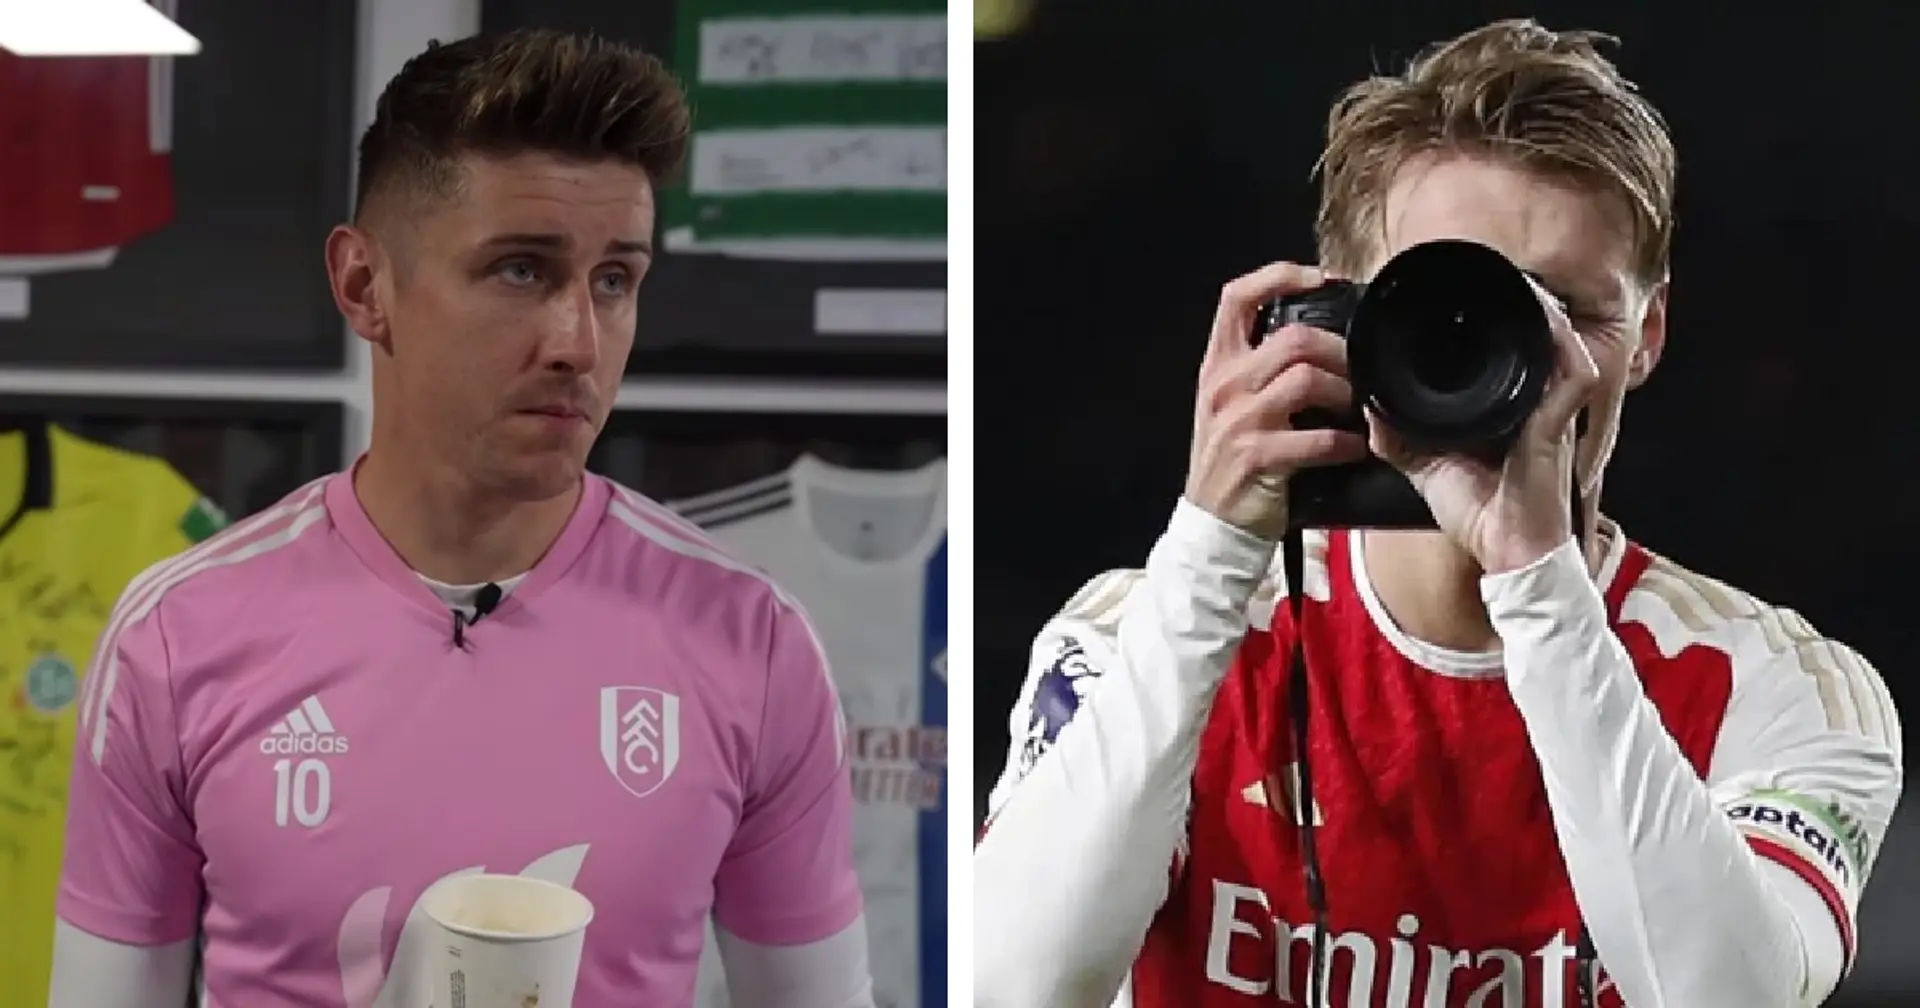 'It's frightening': Fulham midfielder Cairney on why Arsenal 'over-celebrated' win over Liverpool